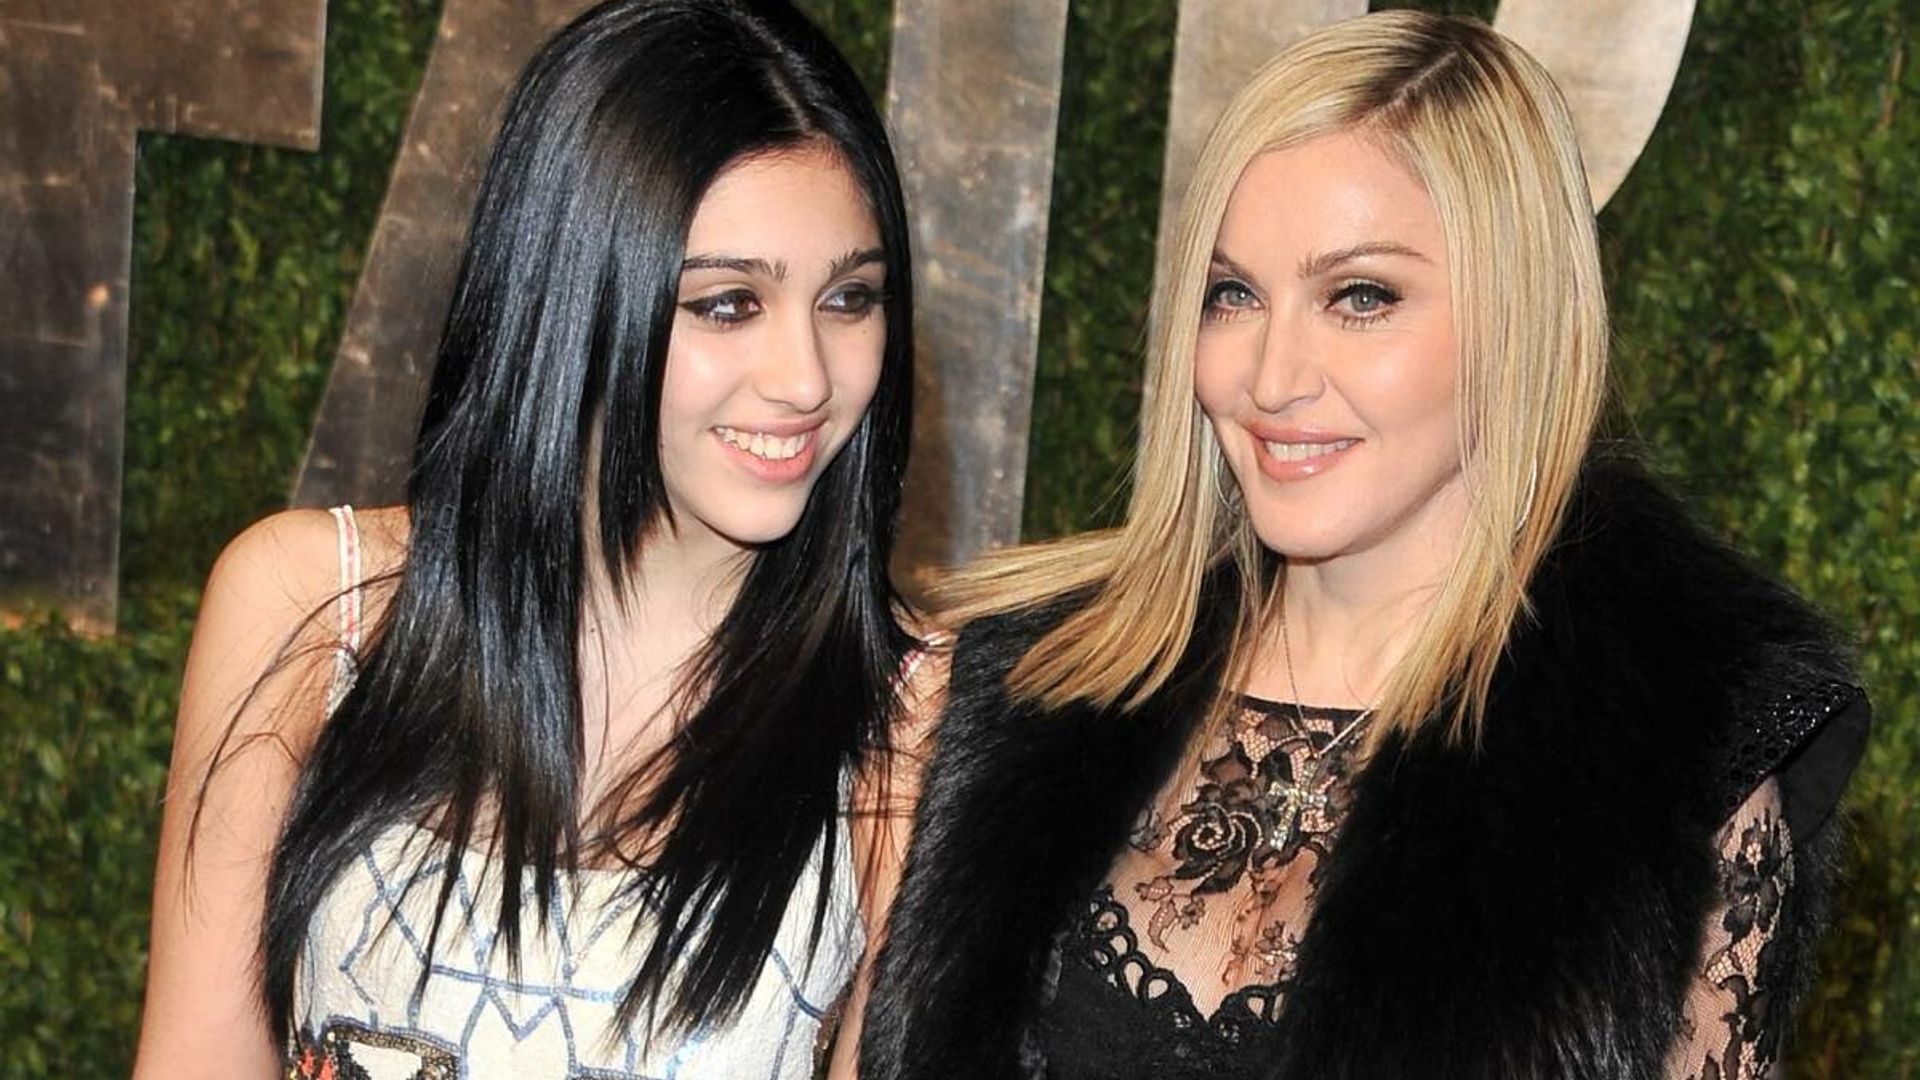 Madonna's daughter Lourdes Leon stuns in intimate bed photo that Instagram deleted